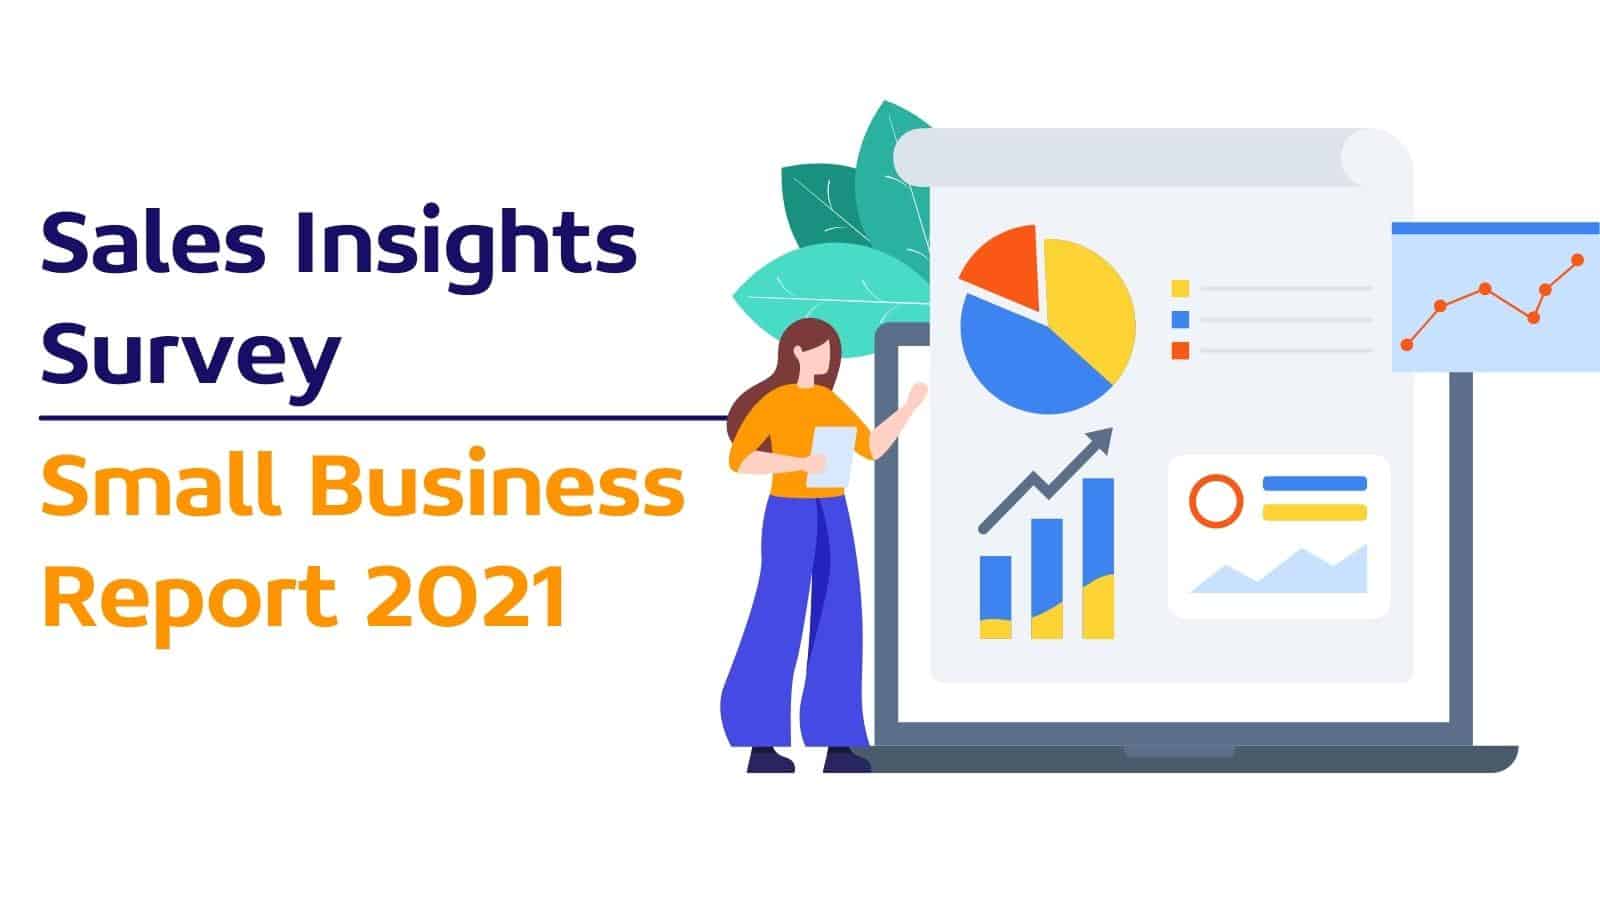 Small Business Trends for 2022: Sales Insights Survey